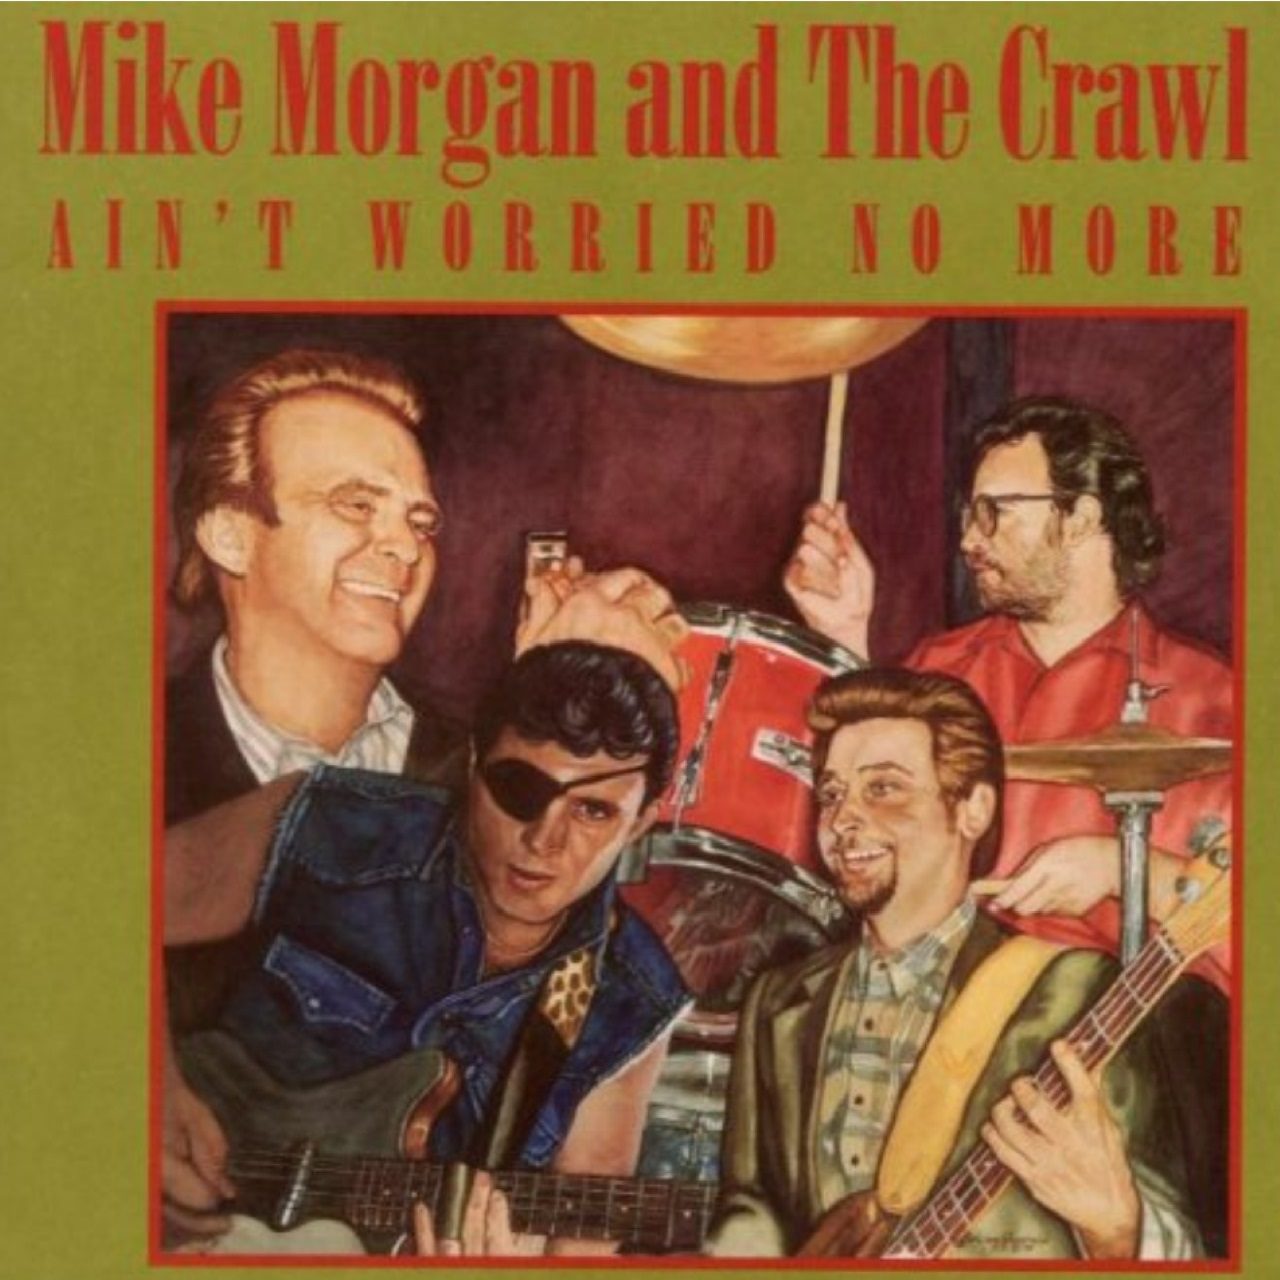 Mike Morgan & The Crawl – Ain’t Worried No More cover album